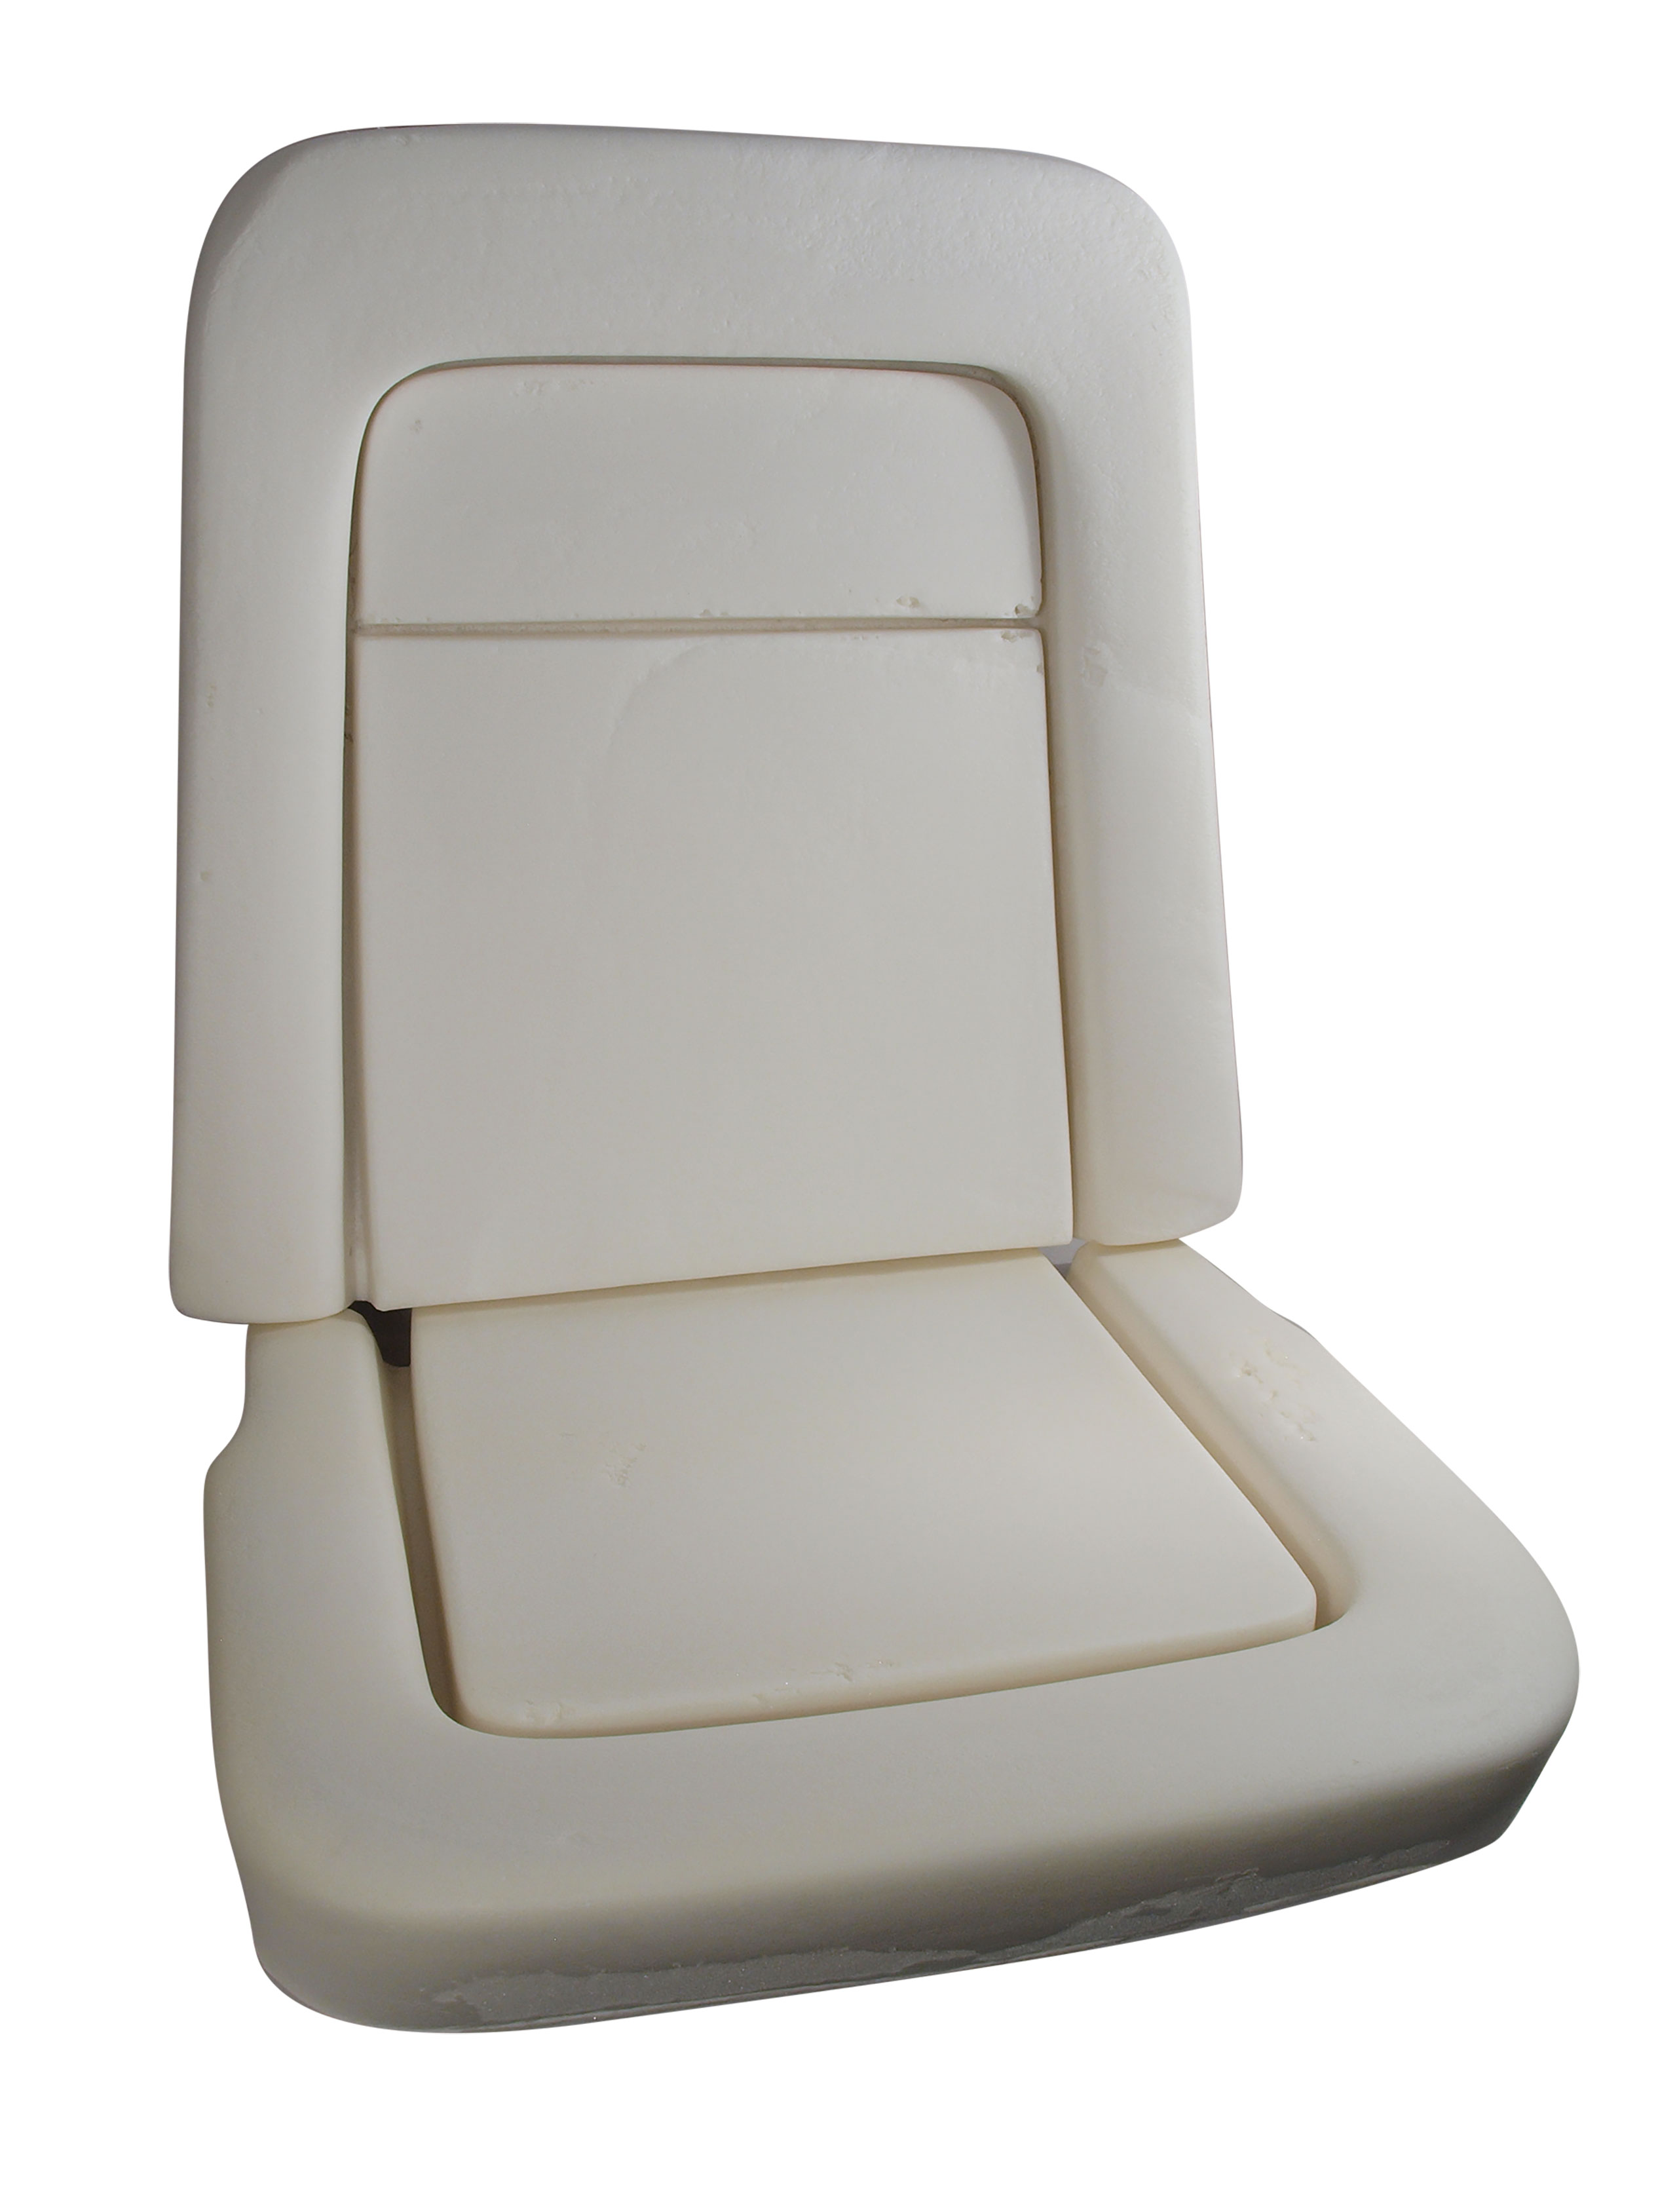 First Generation 1968-1969 Ford Mustang Seat Foam - Standard Or Deluxe - 1 Top & 1 Bottom - Auto Accessories of America